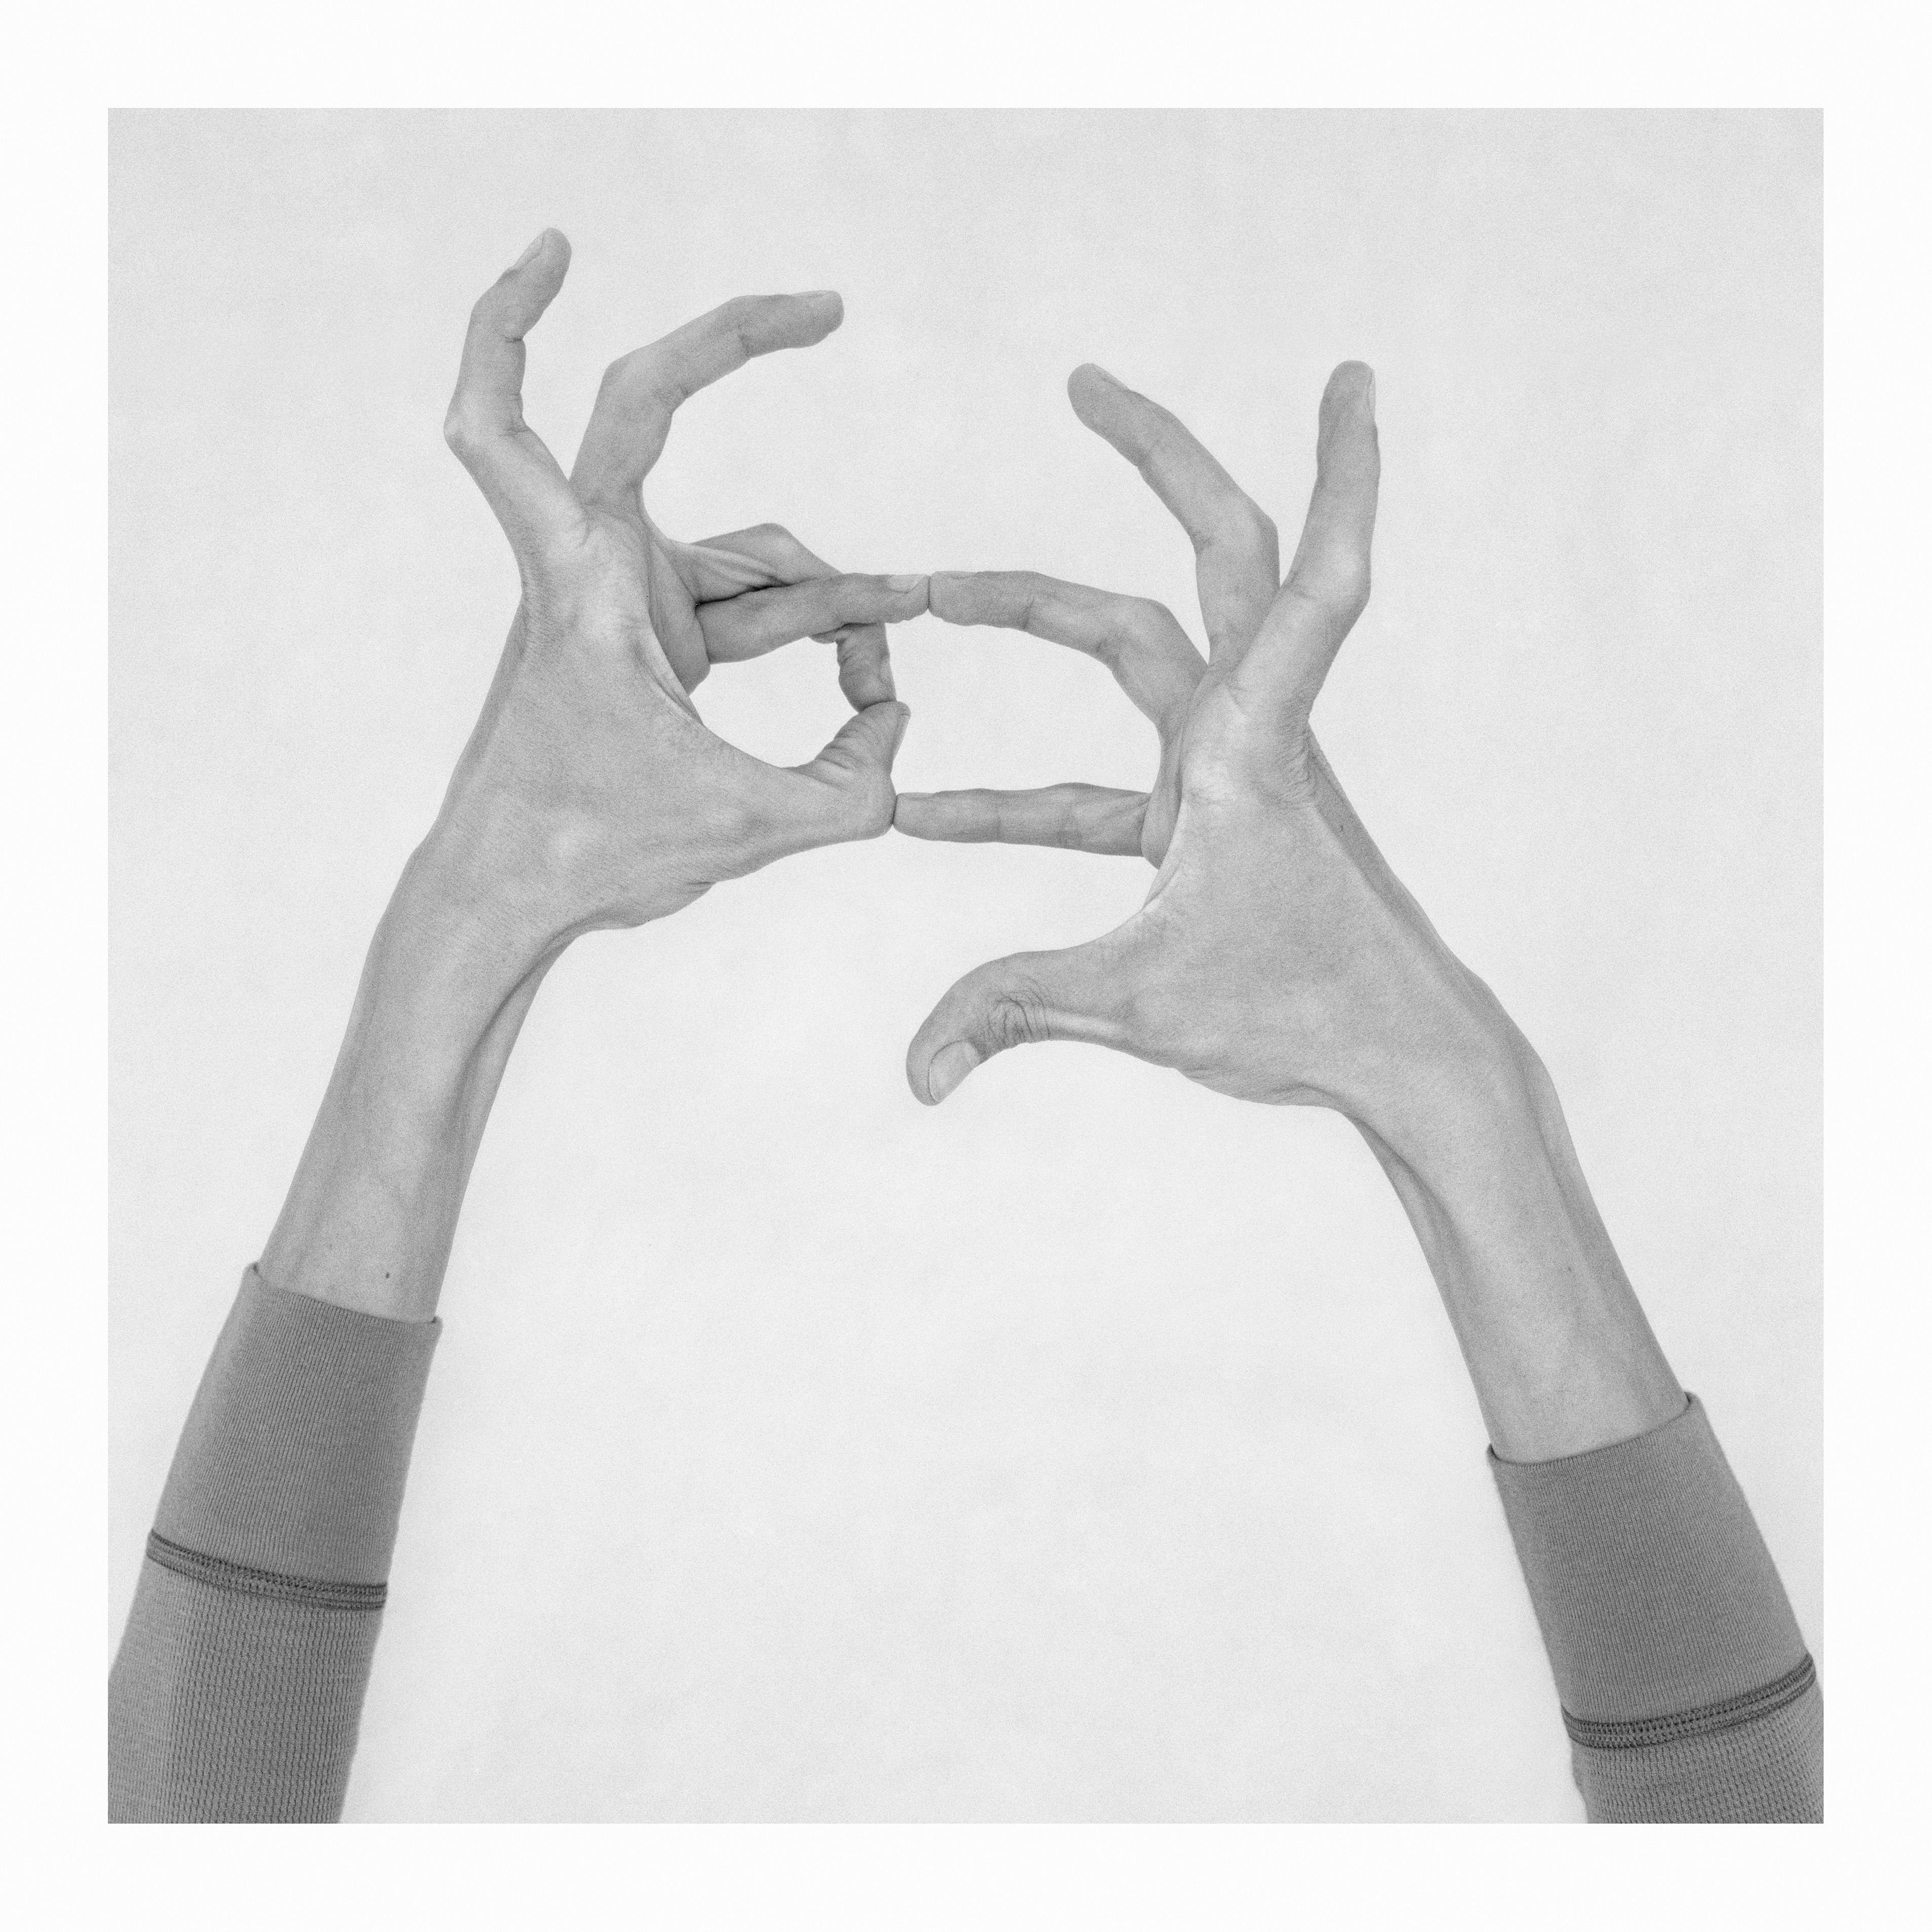 Nico Baixas / Gos-com-fuig Figurative Photograph - Untitled XI. From the Series Chiromorphose. Hands. Black & White Photography